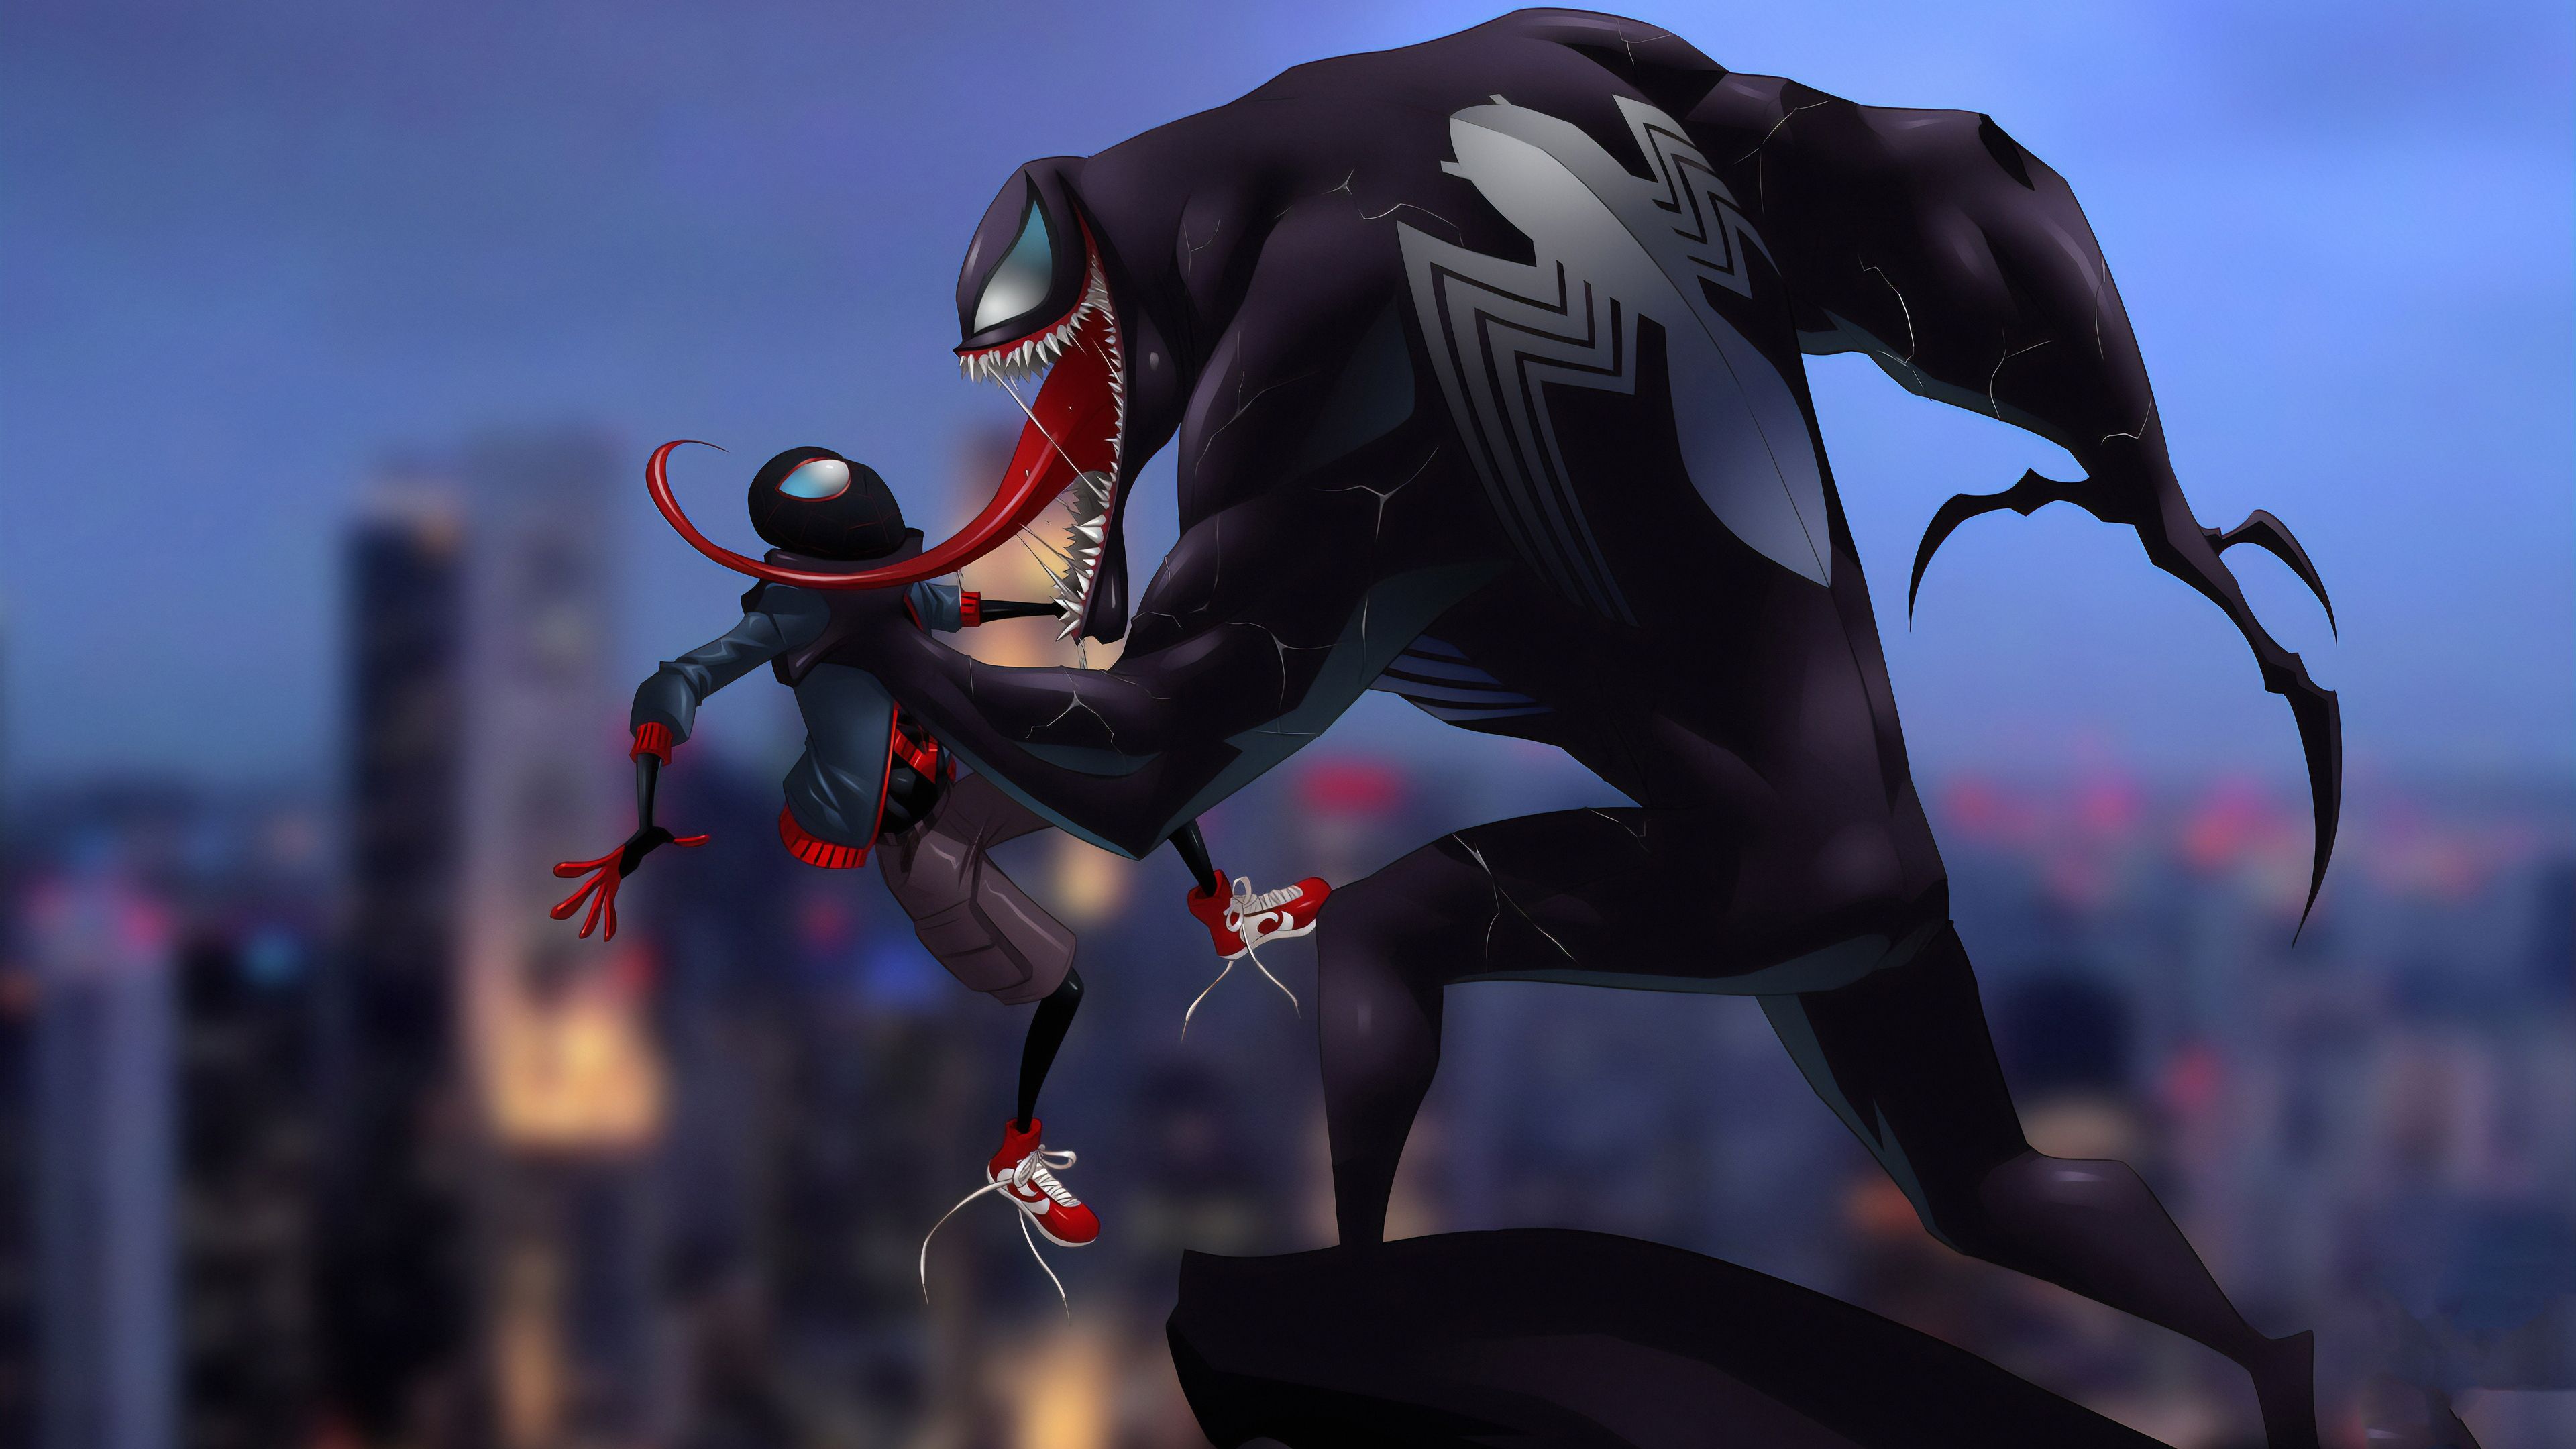 Wallpapers 4k Spider Man And Venom Wallpapers.